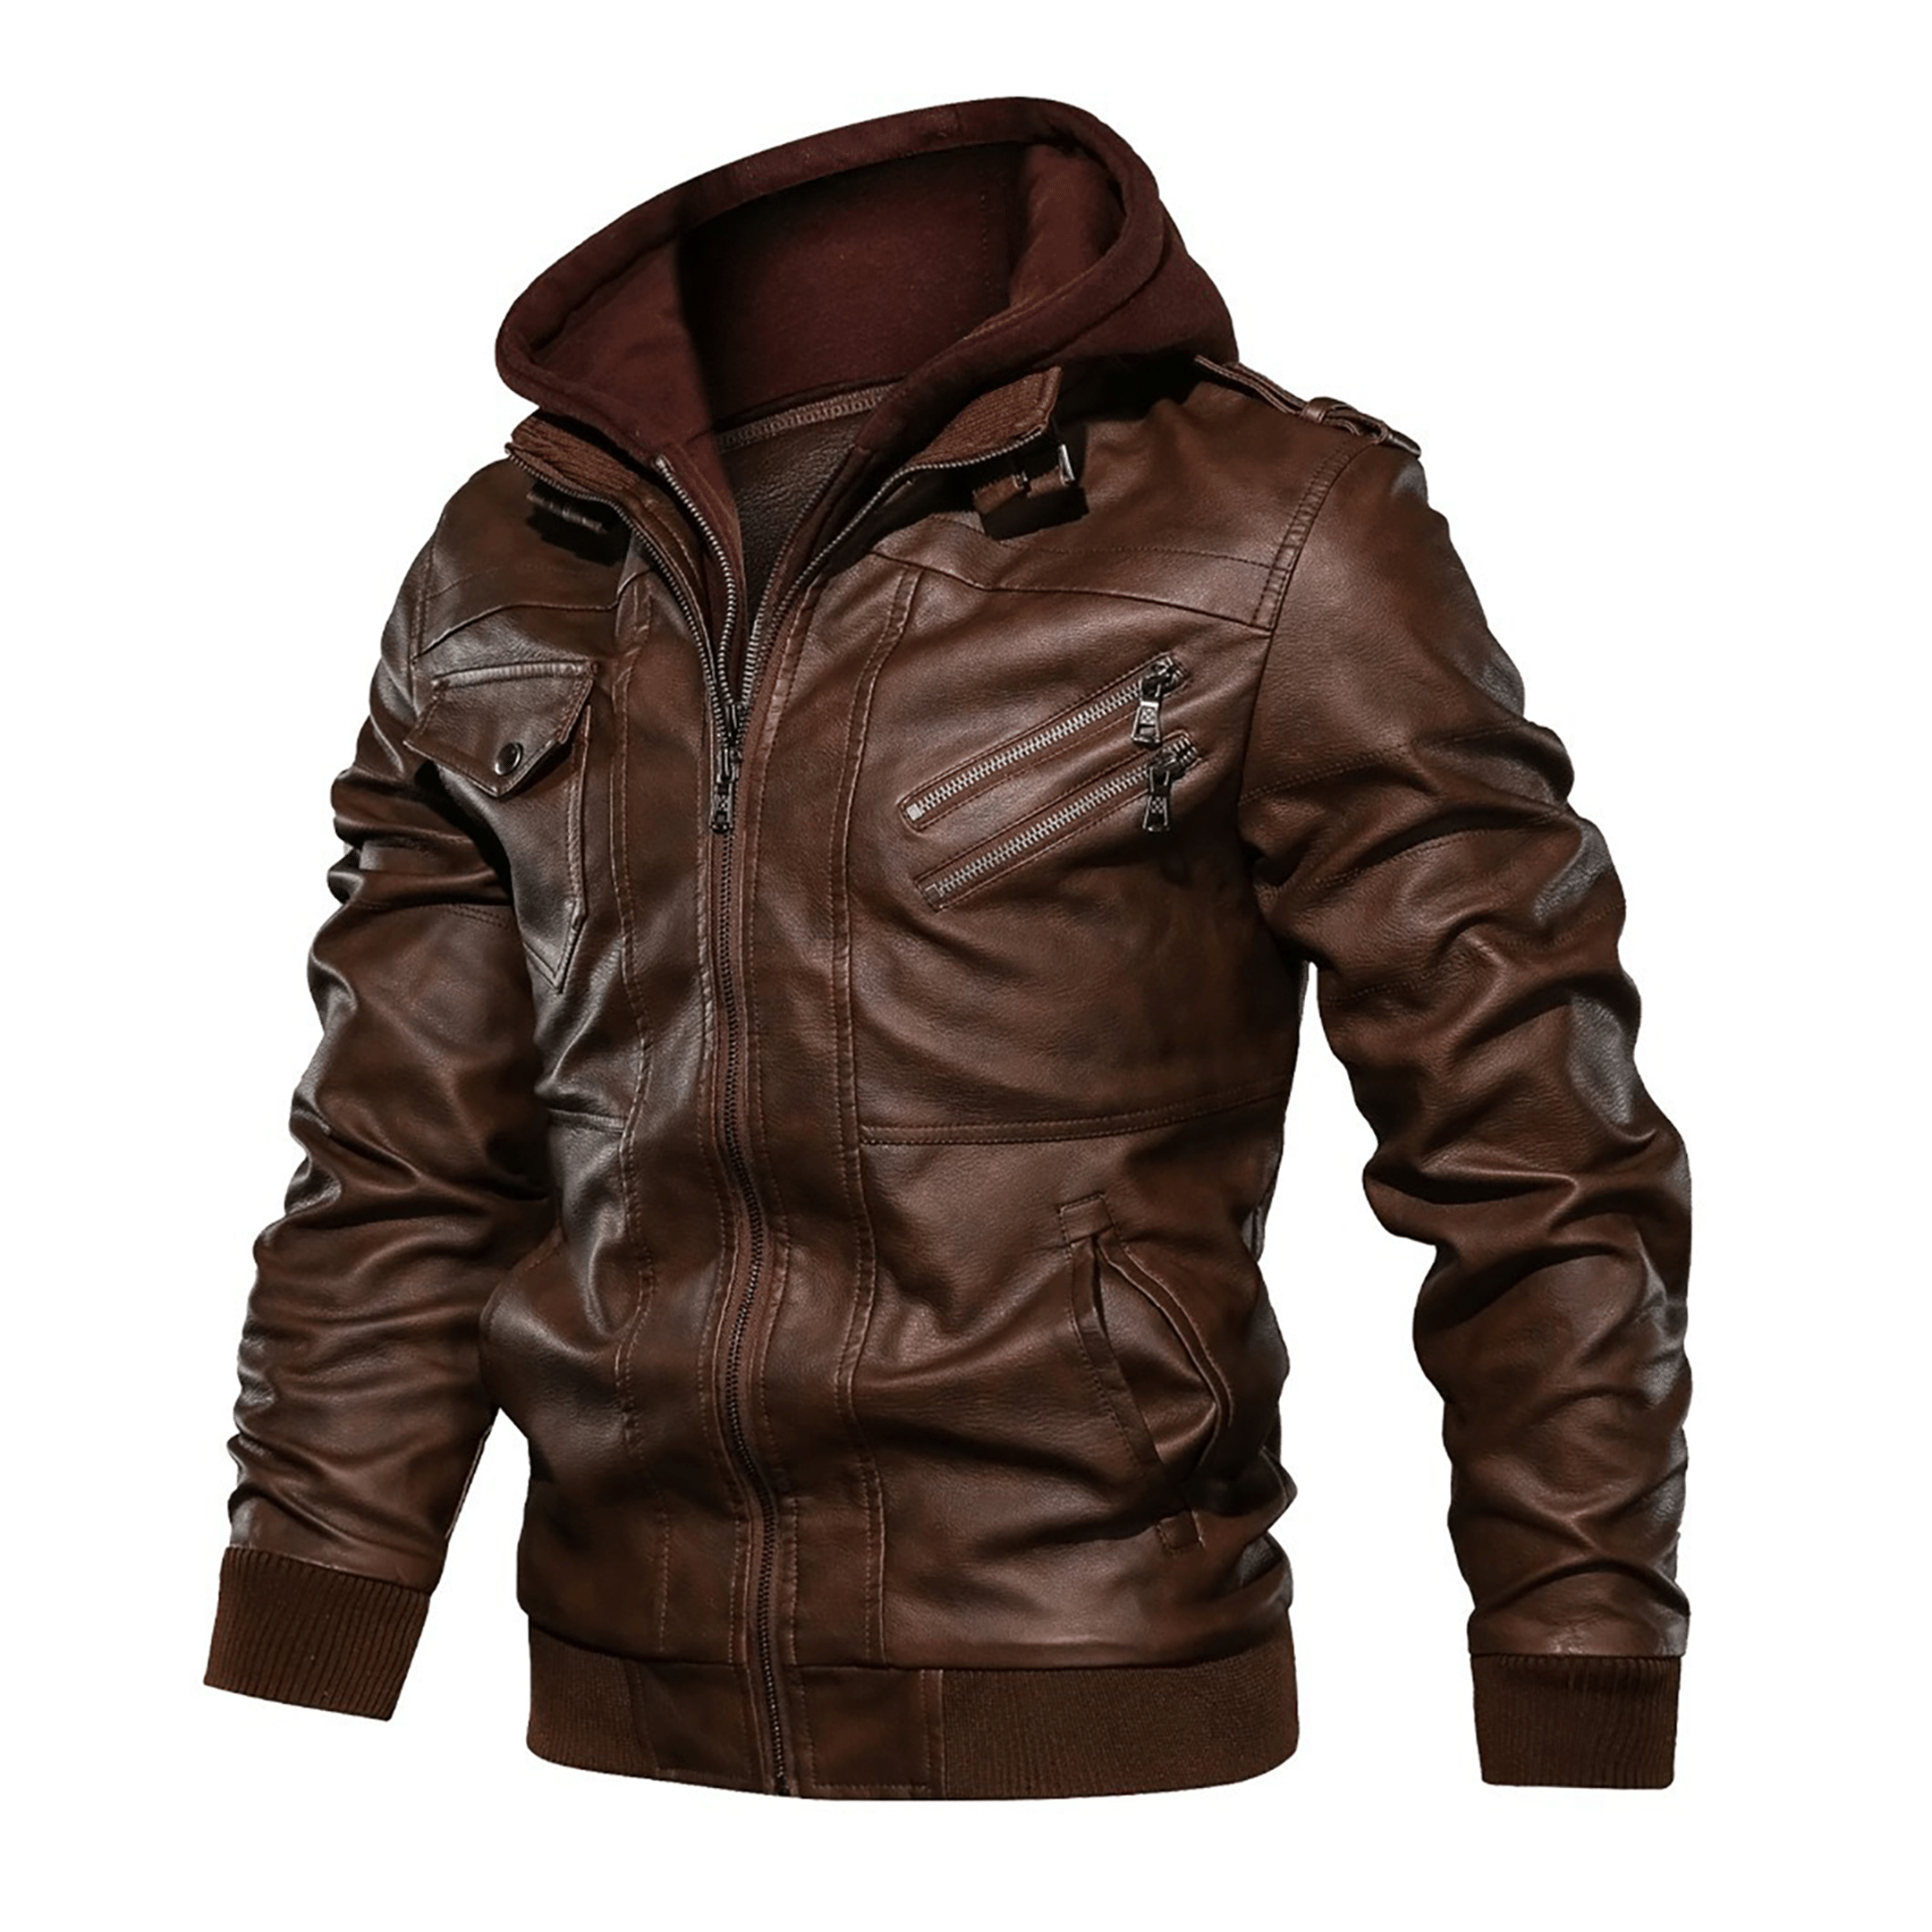 Top leather jackets and latest products 419